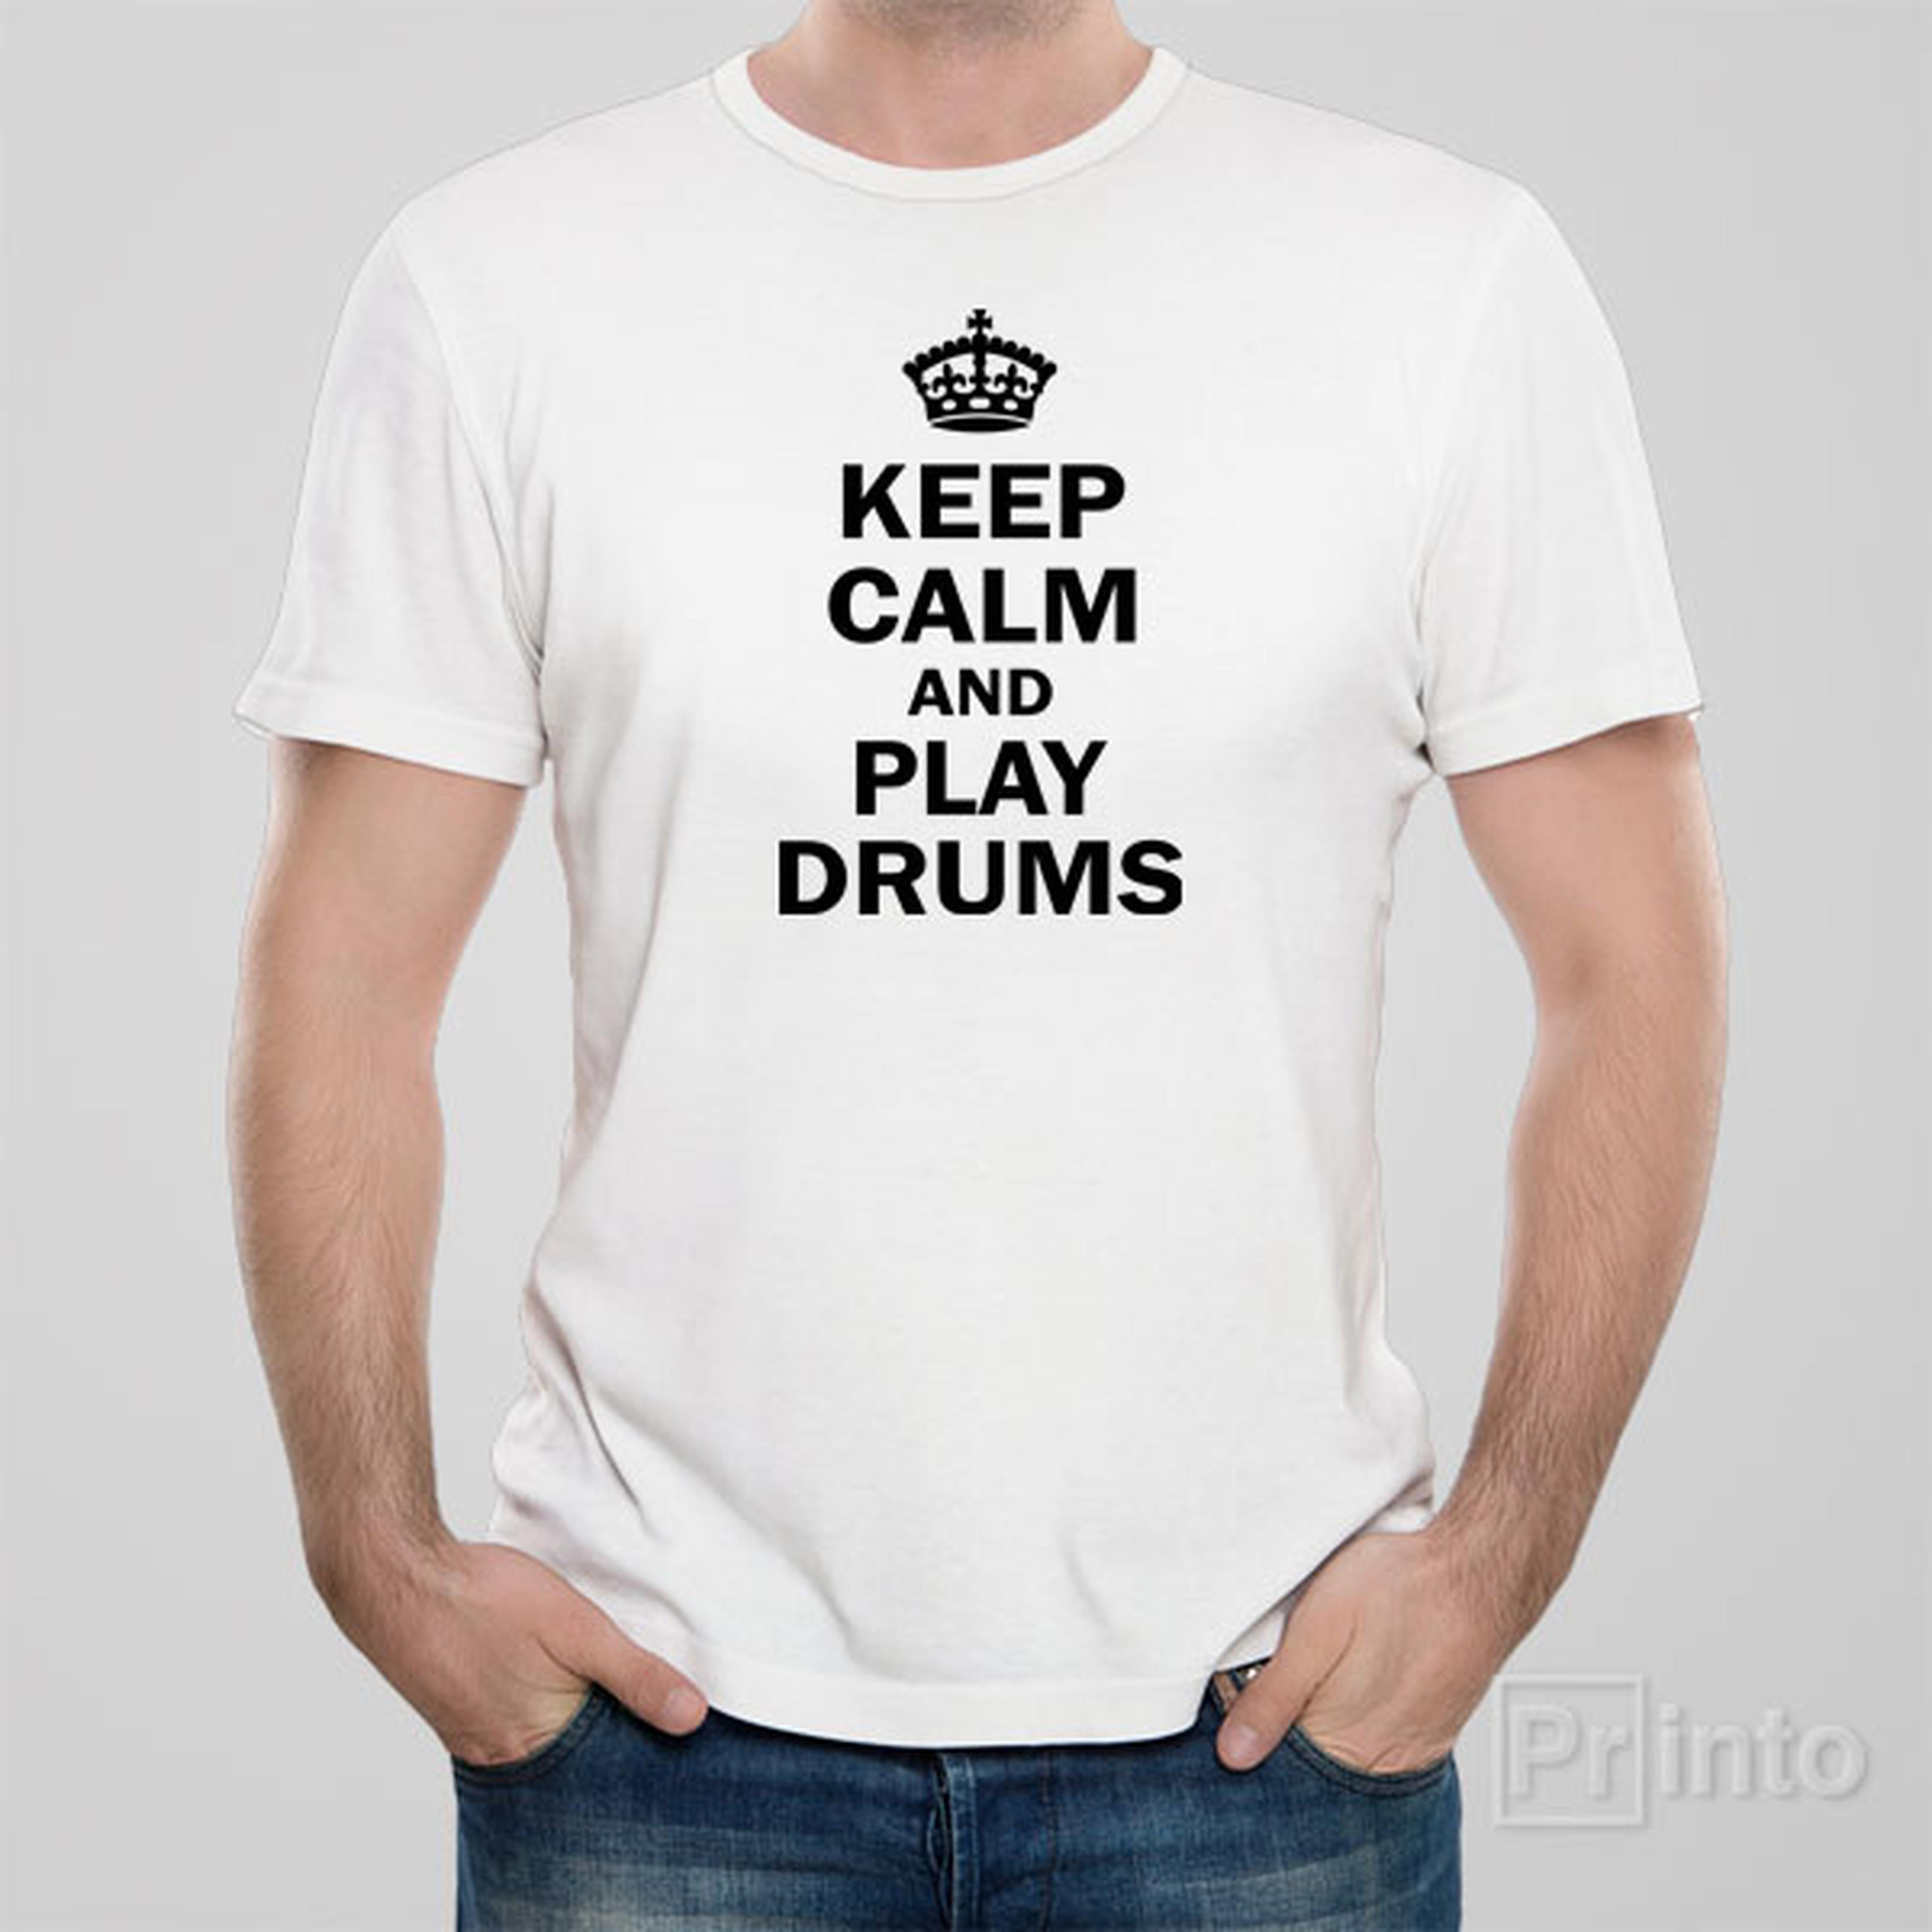 keep-calm-and-play-drums-t-shirt